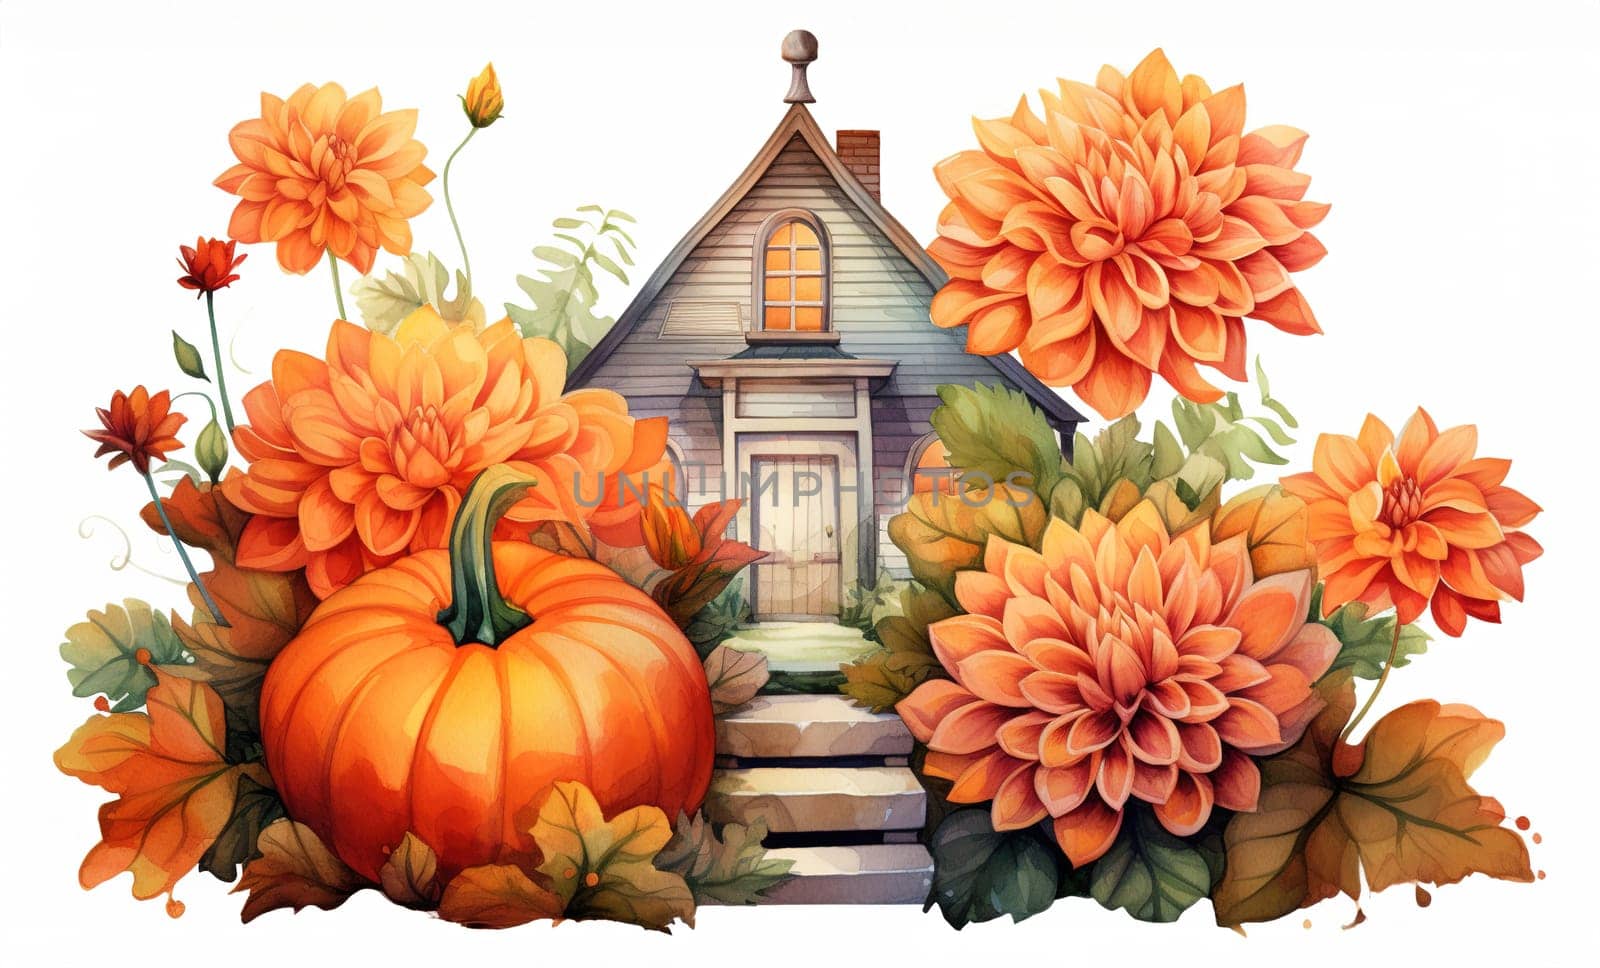 Charming wooden fairy house among orange dahlias and ripe pumpkins, beautiful turquoise roof and brick chimney,garden by KaterinaDalemans